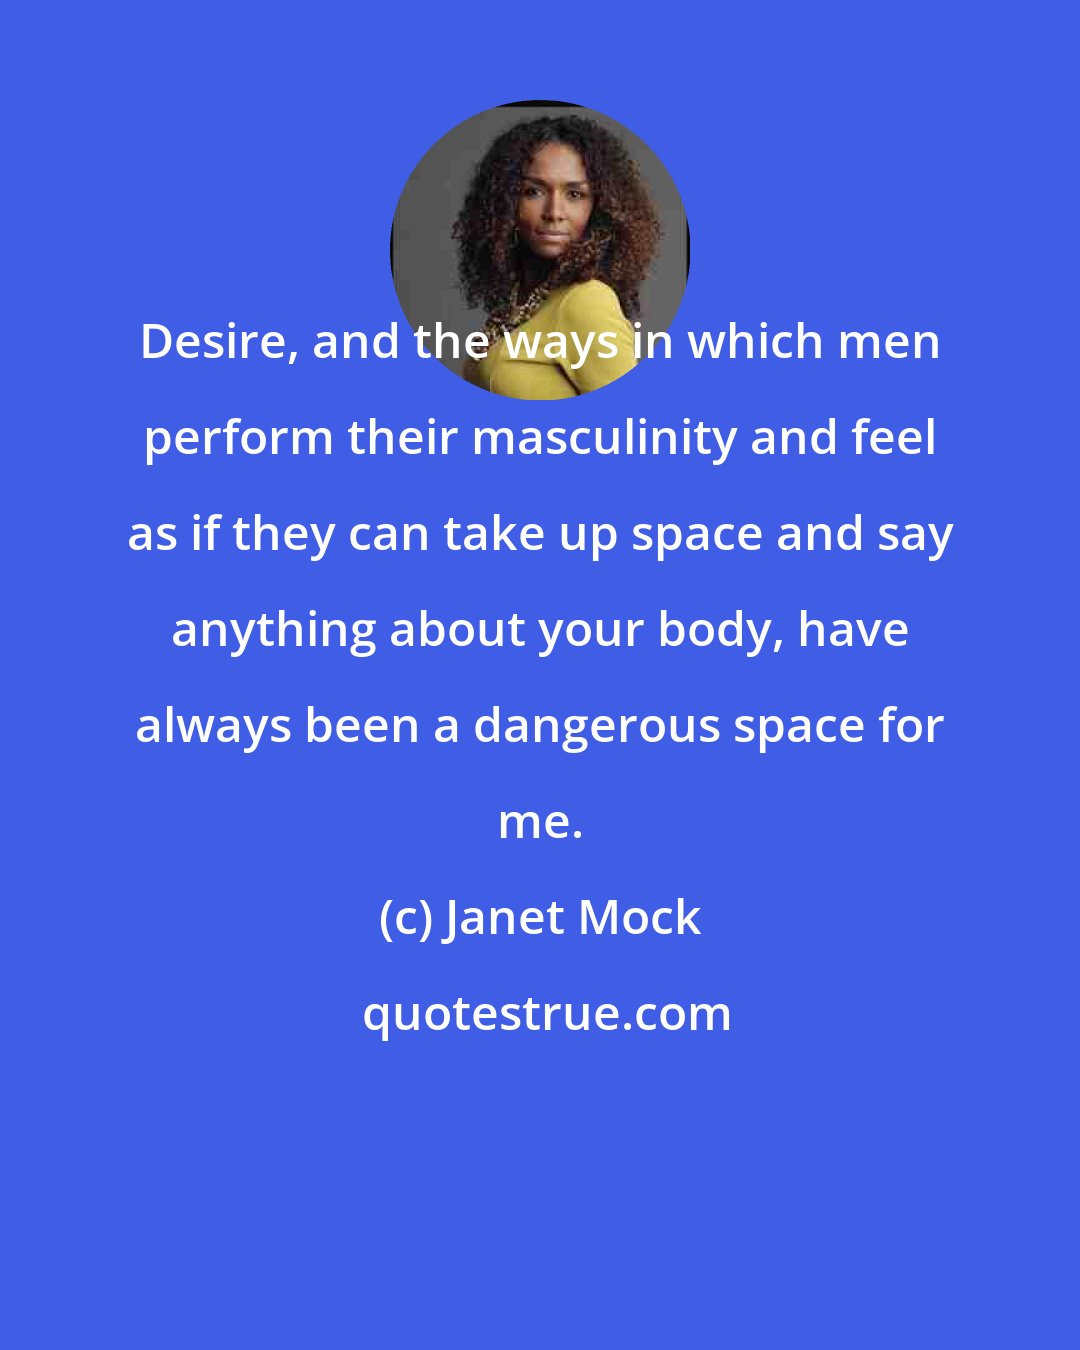 Janet Mock: Desire, and the ways in which men perform their masculinity and feel as if they can take up space and say anything about your body, have always been a dangerous space for me.